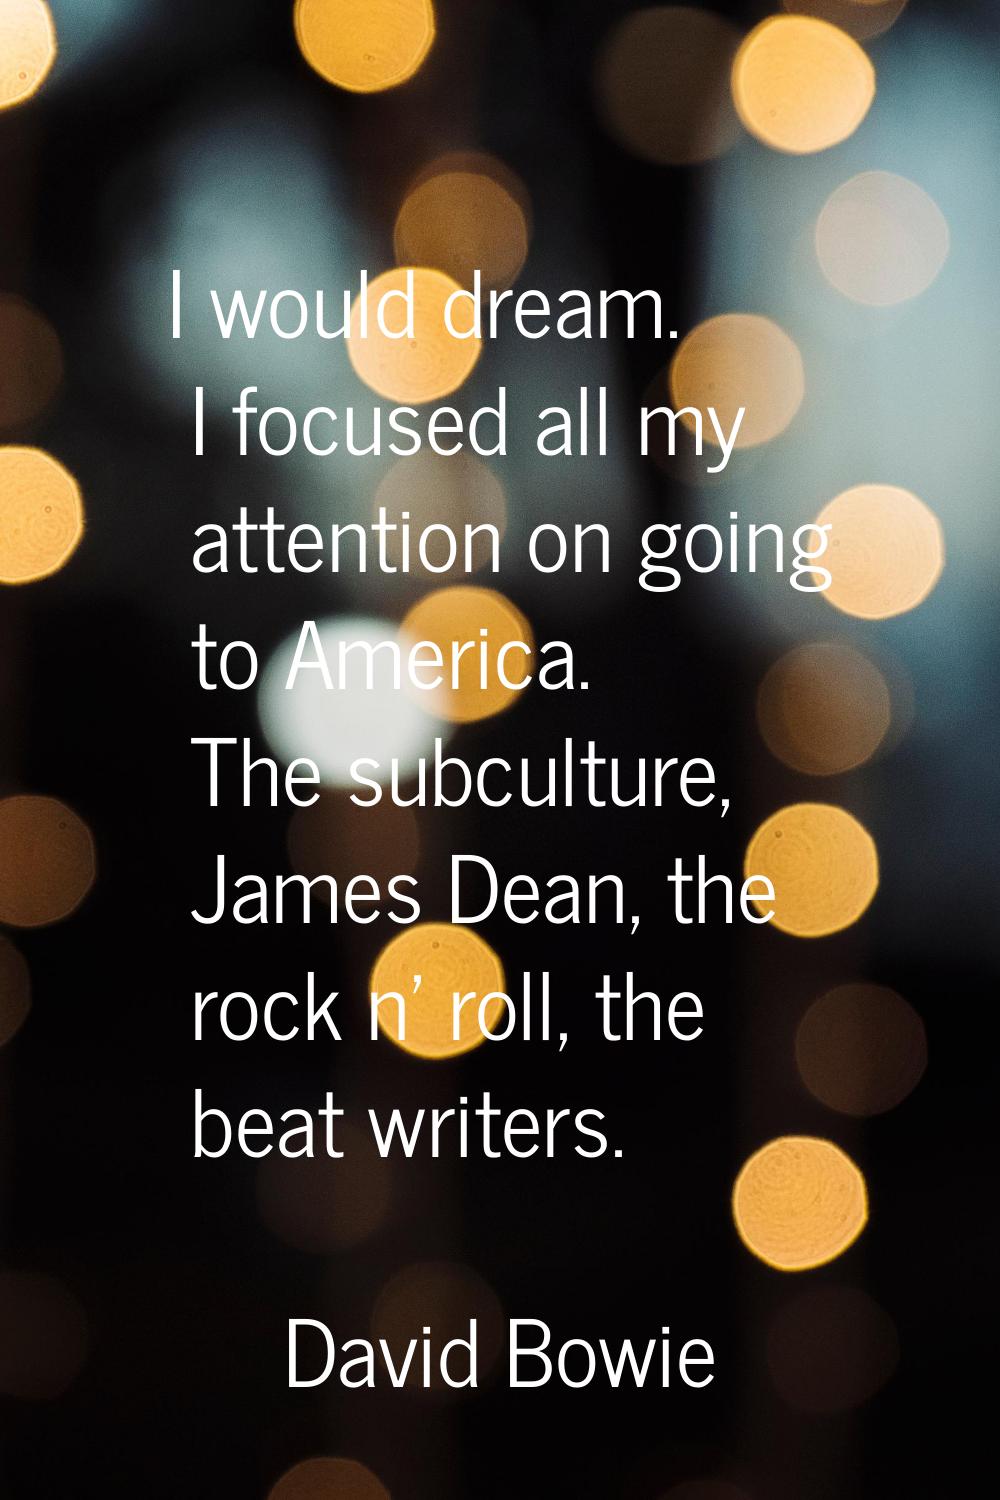 I would dream. I focused all my attention on going to America. The subculture, James Dean, the rock